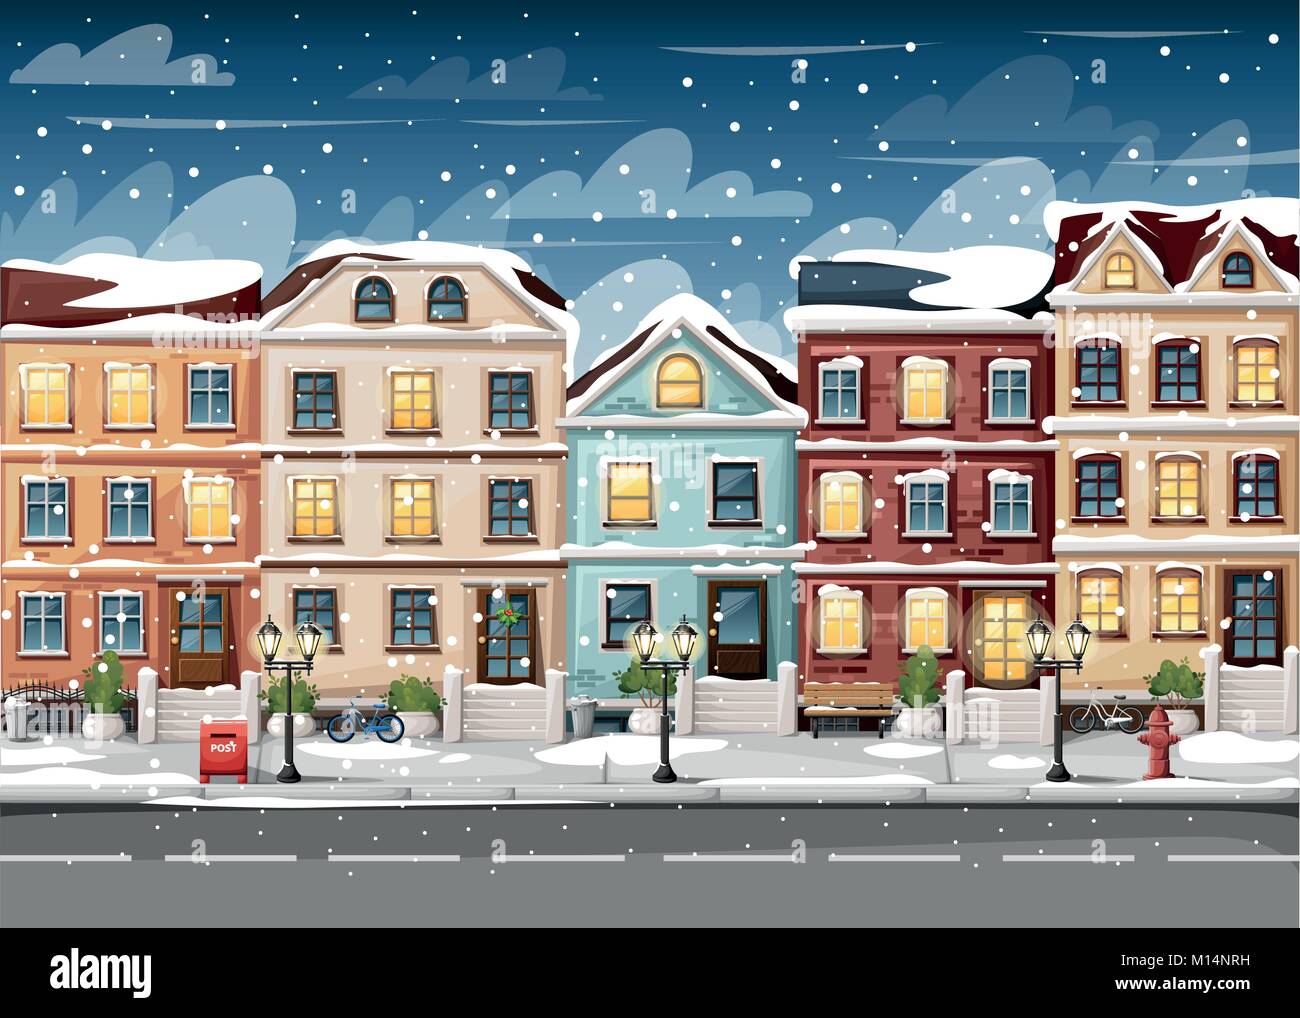 Snow-covered street with colorful houses fire hydrant lights bench red mailbox and bushes in vases cartoon style vector illustration website page and  Stock Vector